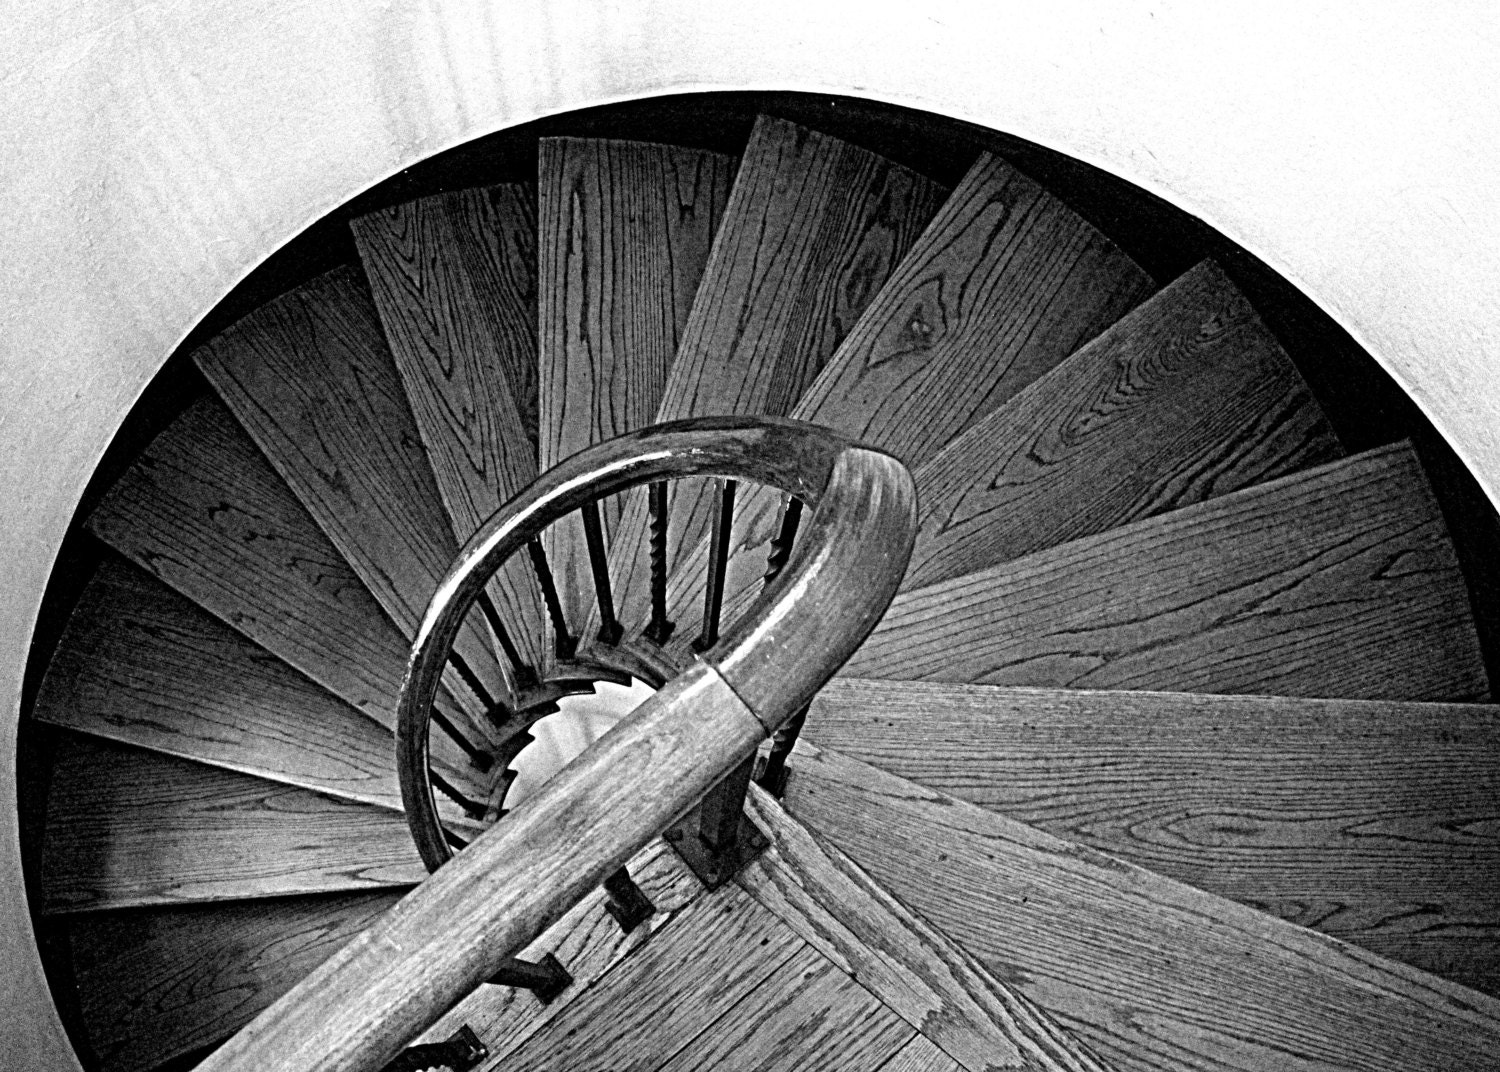 Black And White Photography - Wooden Staircase Fine Art Photograph - Winter Park Florida 5x7 - JudithKimberPhoto